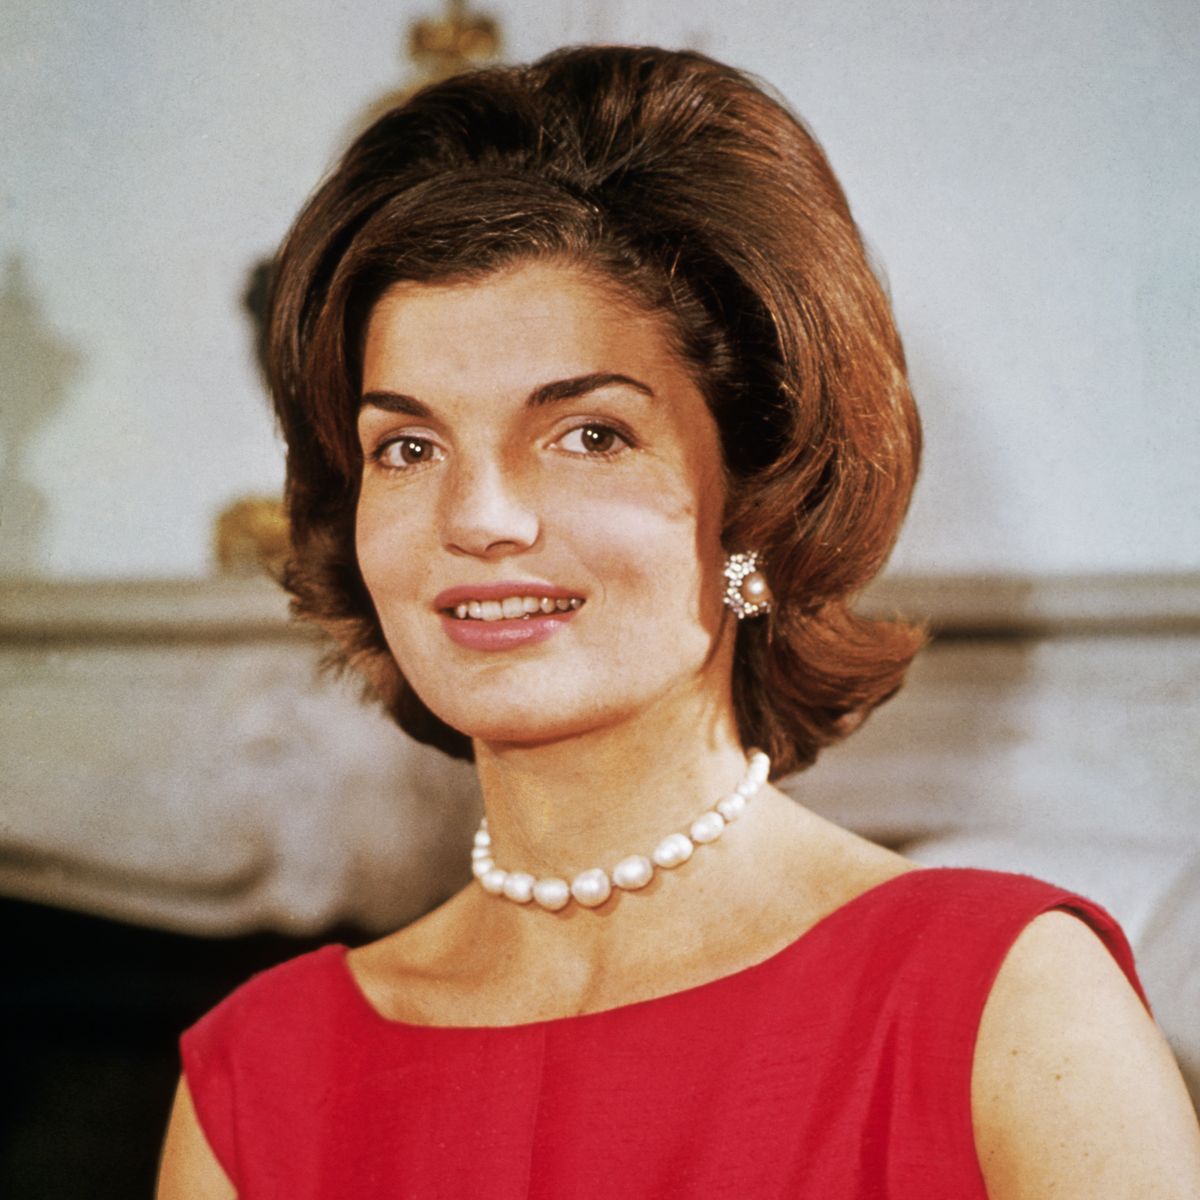 Jacqueline Kennedy at Home Jacqueline Kennedy at her Georgetown home in August 1960.